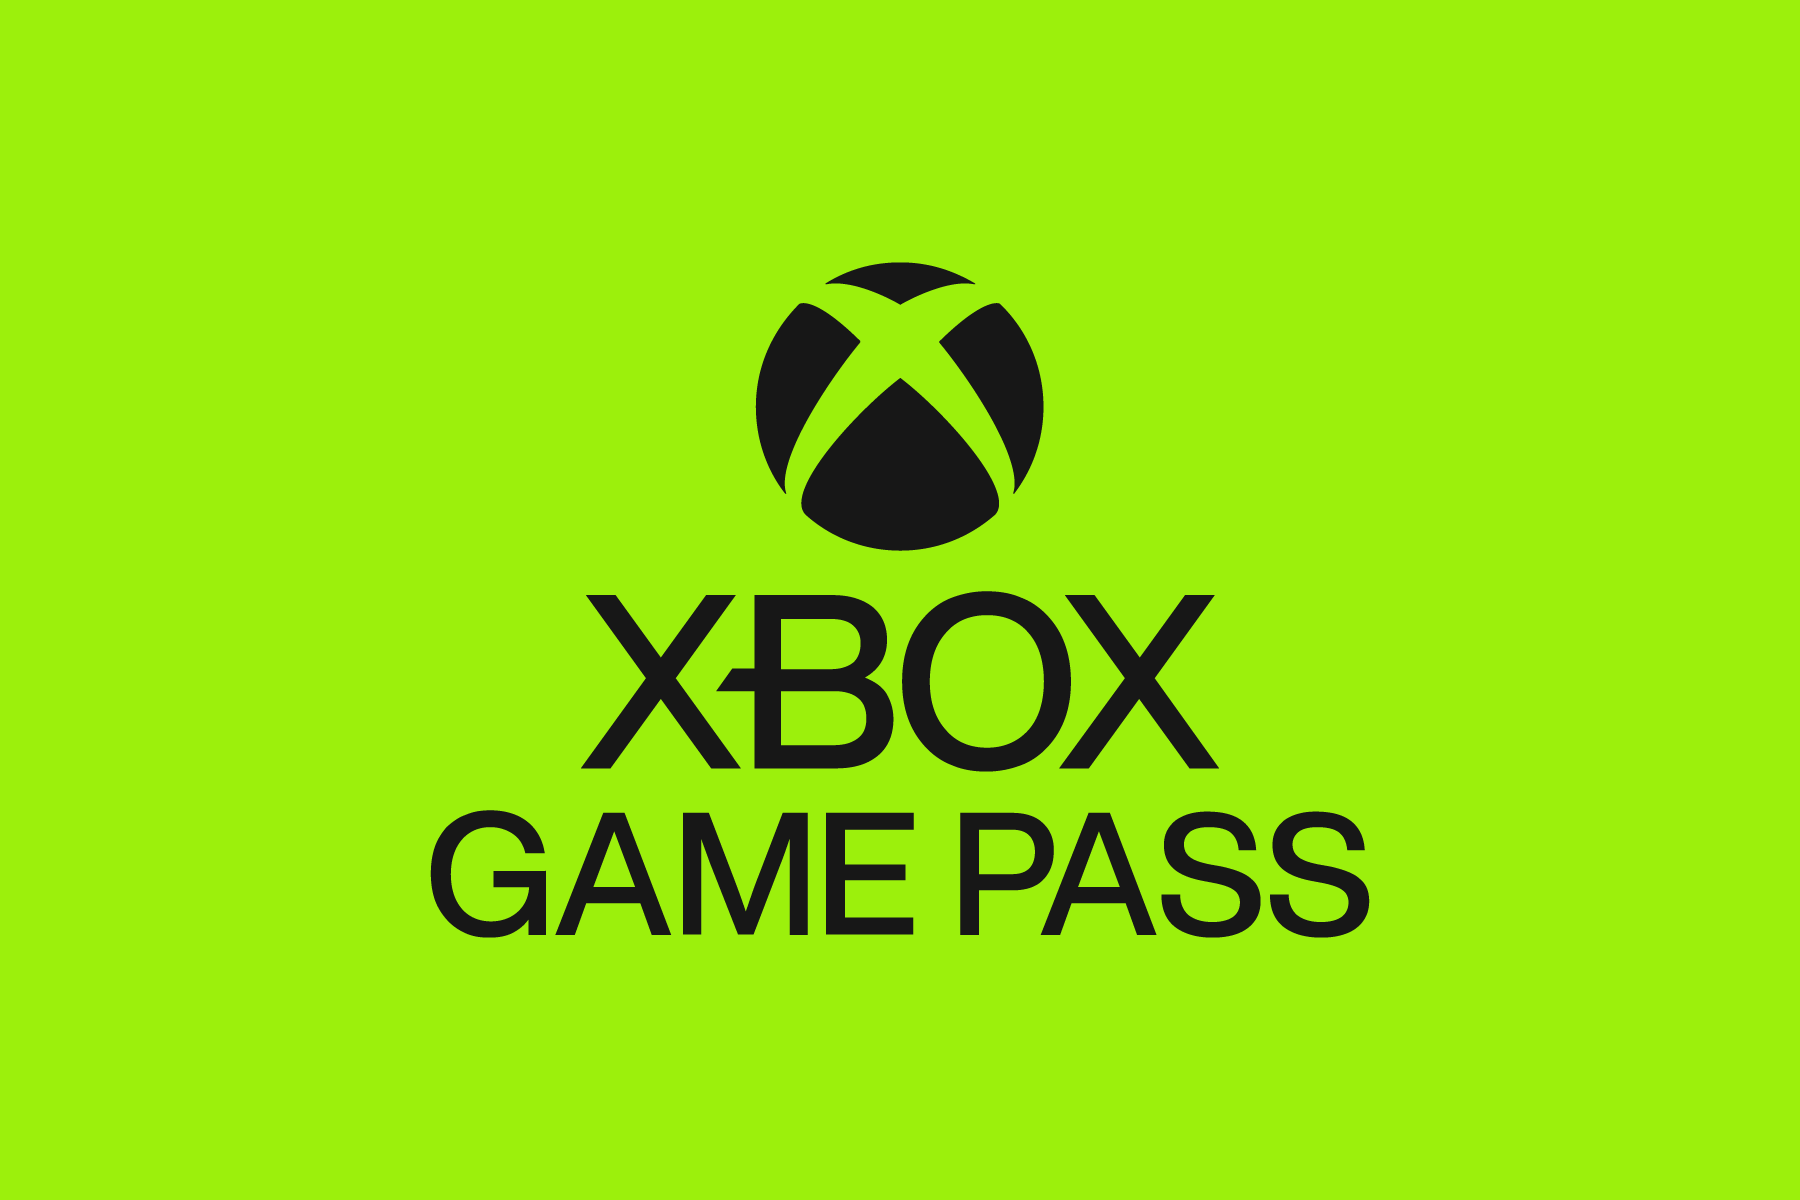 Microsoft ends $1 Xbox Game Pass promo ahead of Starfield's launch